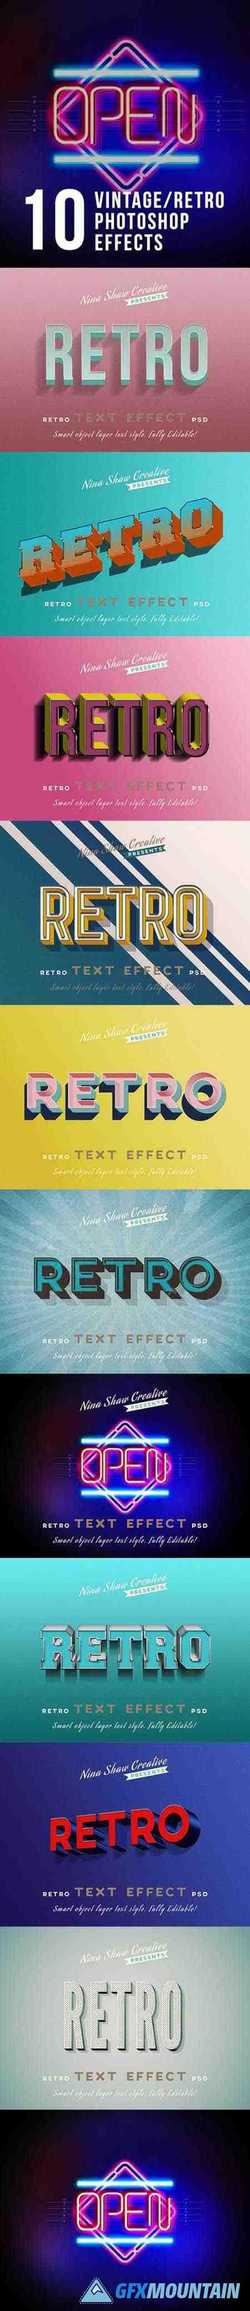 RETRO VINTAGE TEXT EFFECTS - 23825859